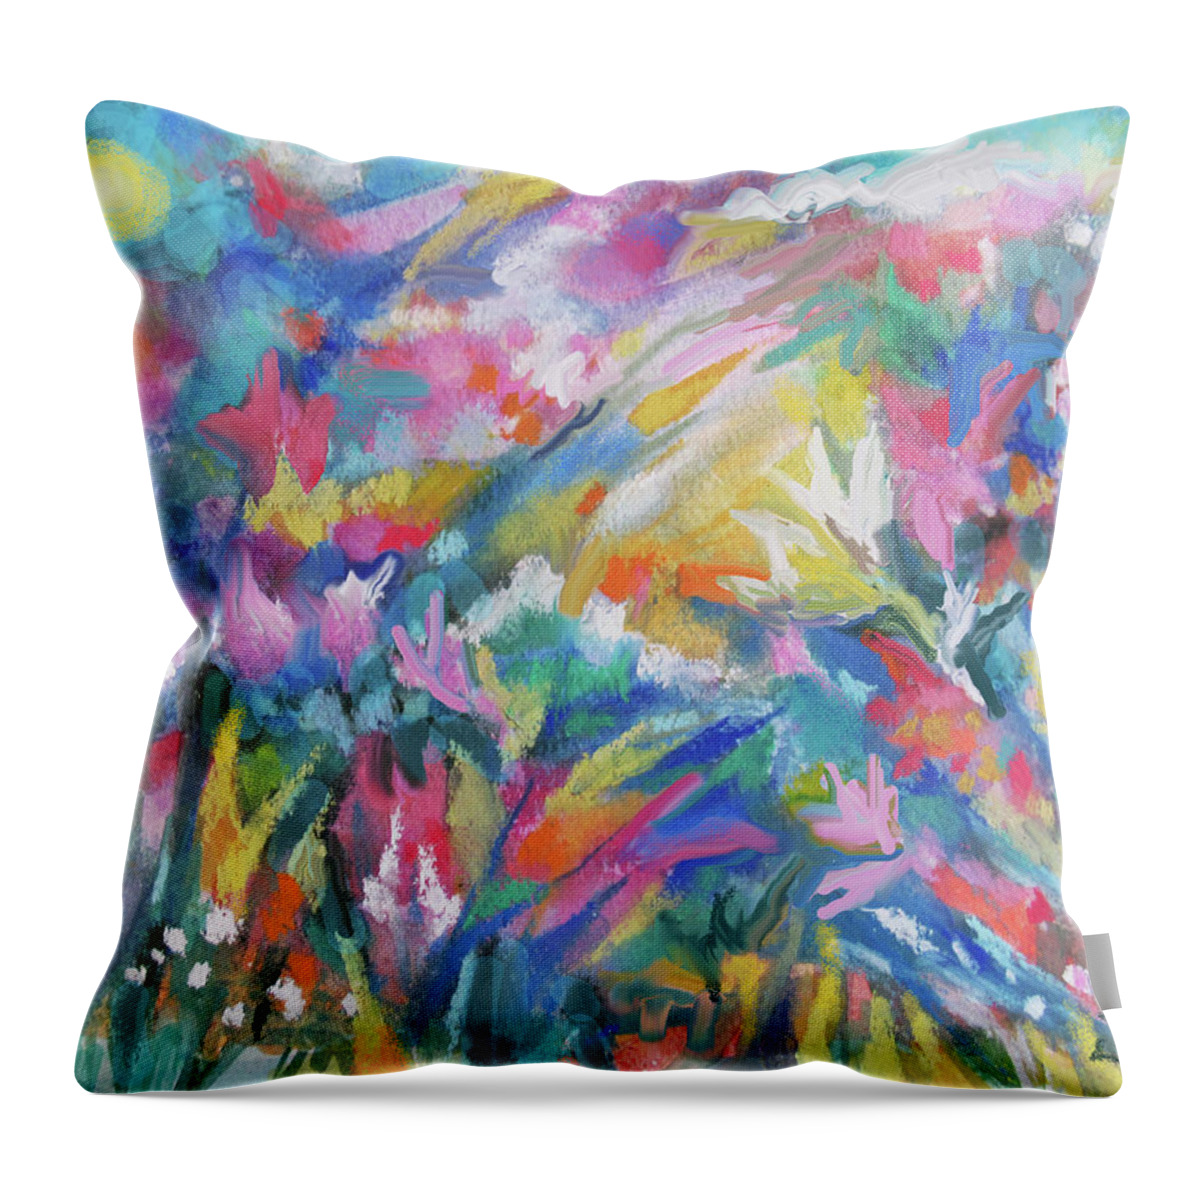 Colorful Abstract Garden Throw Pillow featuring the painting Soft Garden Breezes by Jean Batzell Fitzgerald